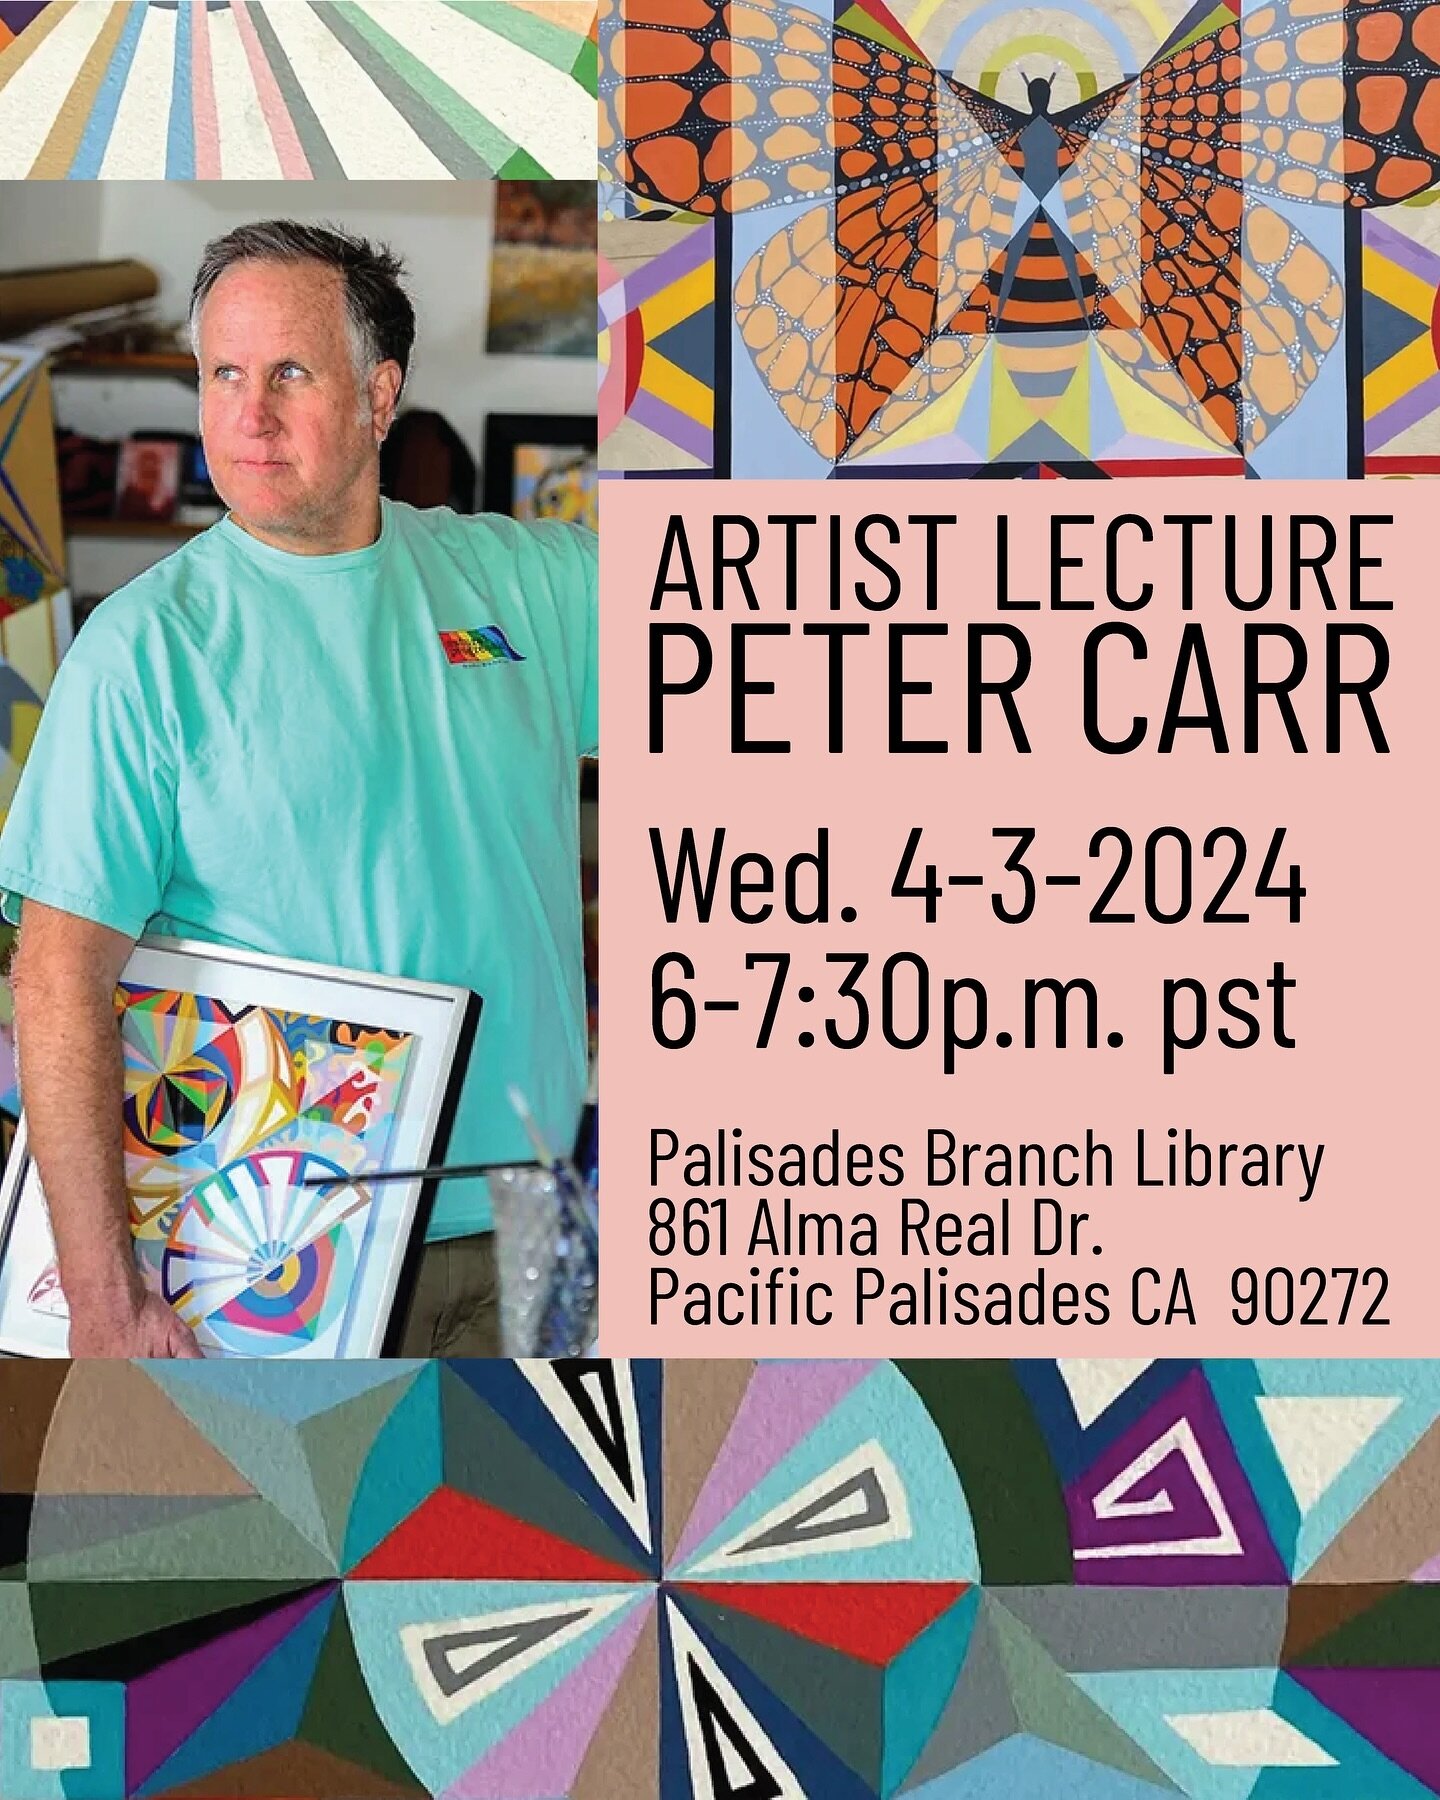 Peter Carr, a local Palisadian, will be discussing his art and artist process with us on Wednesday, April 3, 2024 at the Palisades Branch Library from 6:00 pm -7:30pm.